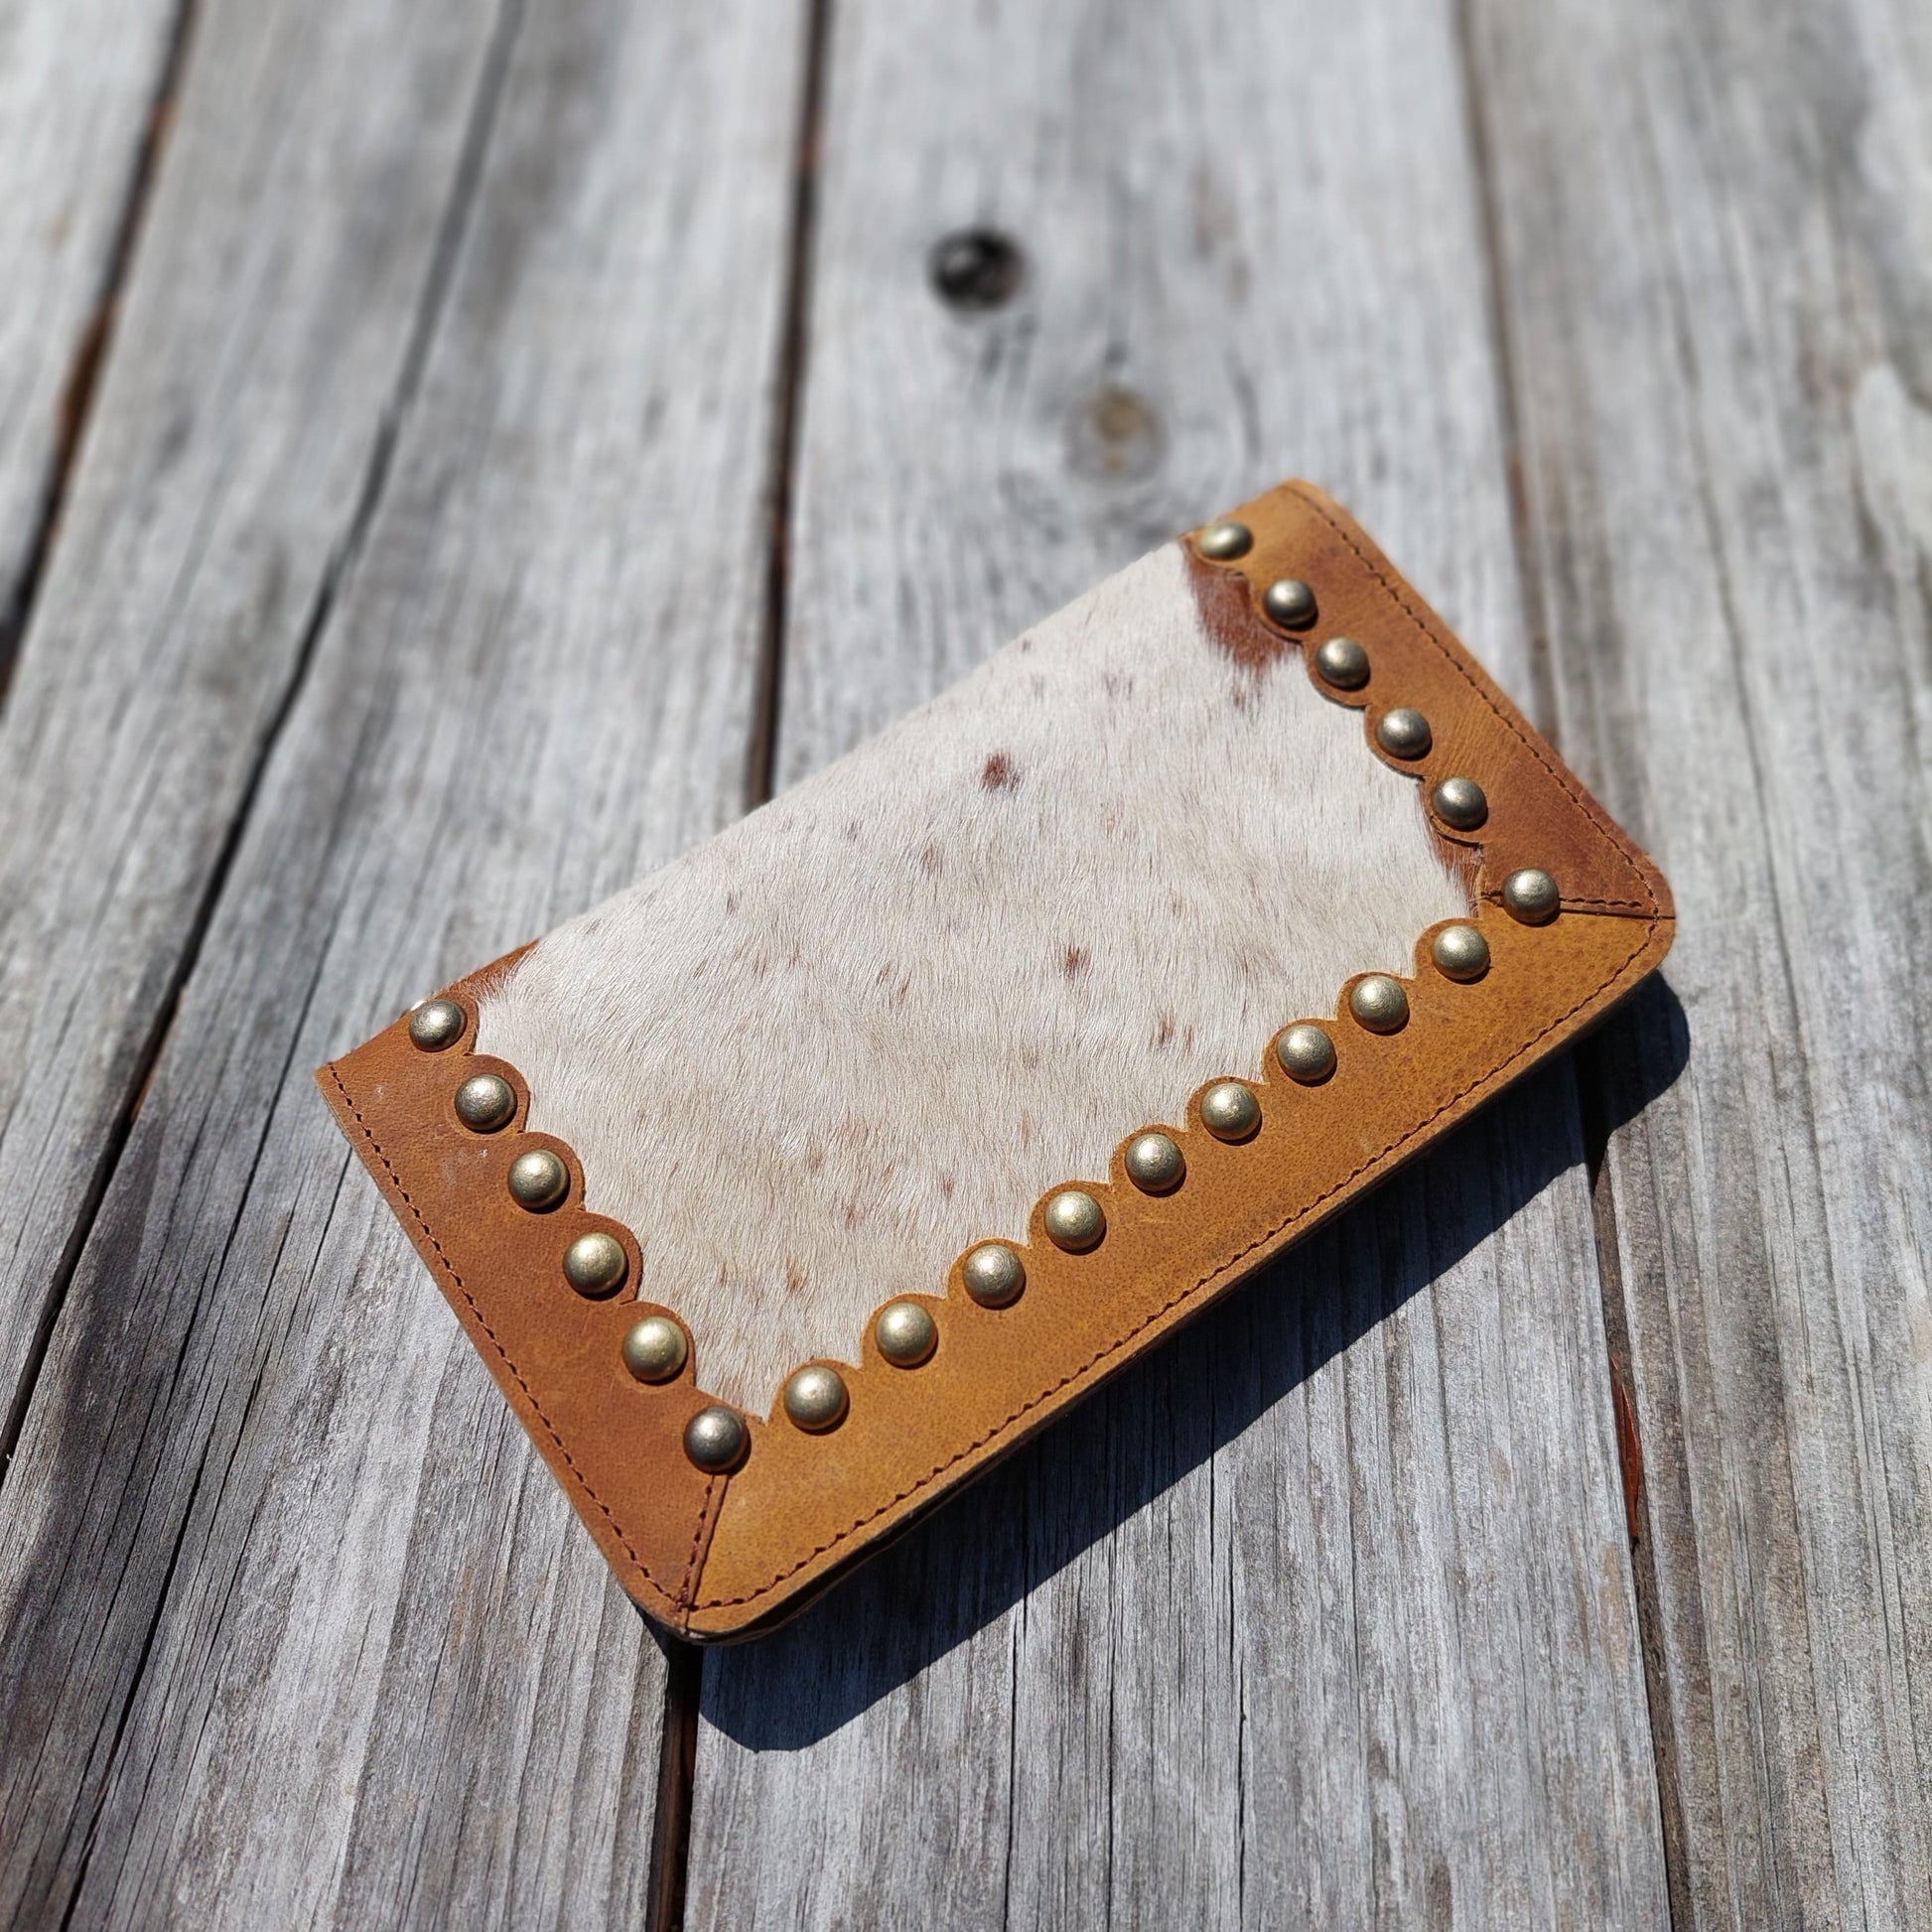 Long wallet | Long cowhide and leather wallet two snap closure | scalloped leather trim around walled decorated with brass studs | handmade | Western wallet | unisex | Etsy